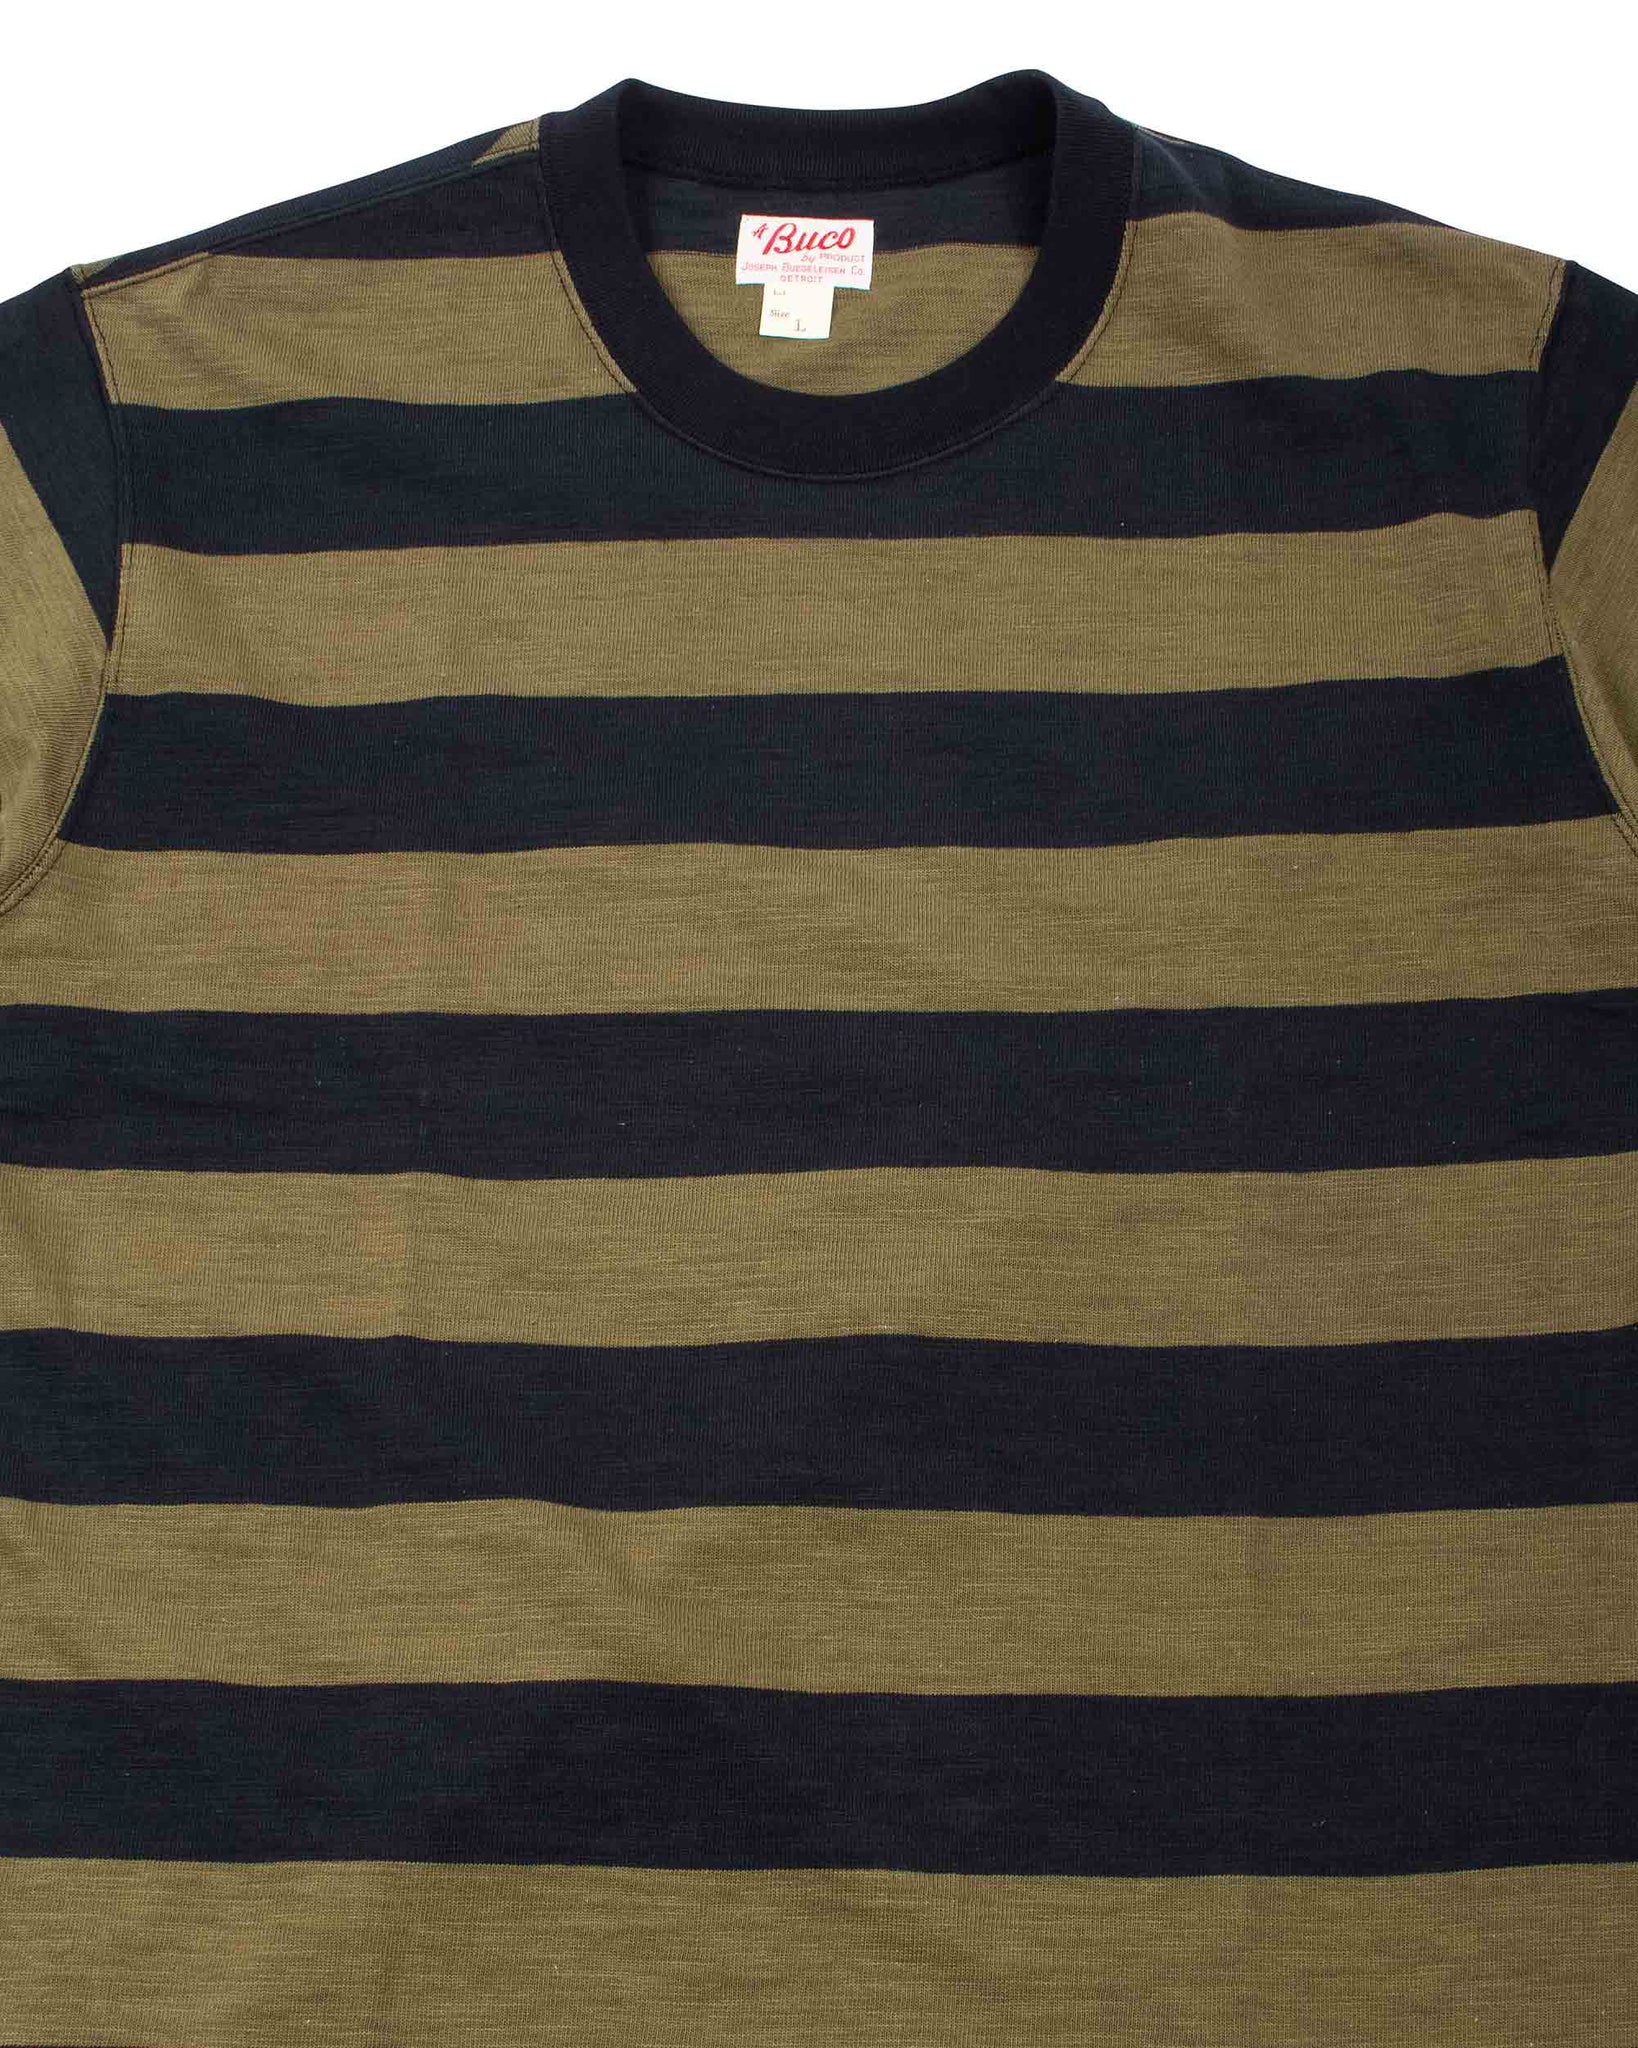 The Real McCoy's BC20007 Buco Stripe Tee S/S Olive Details